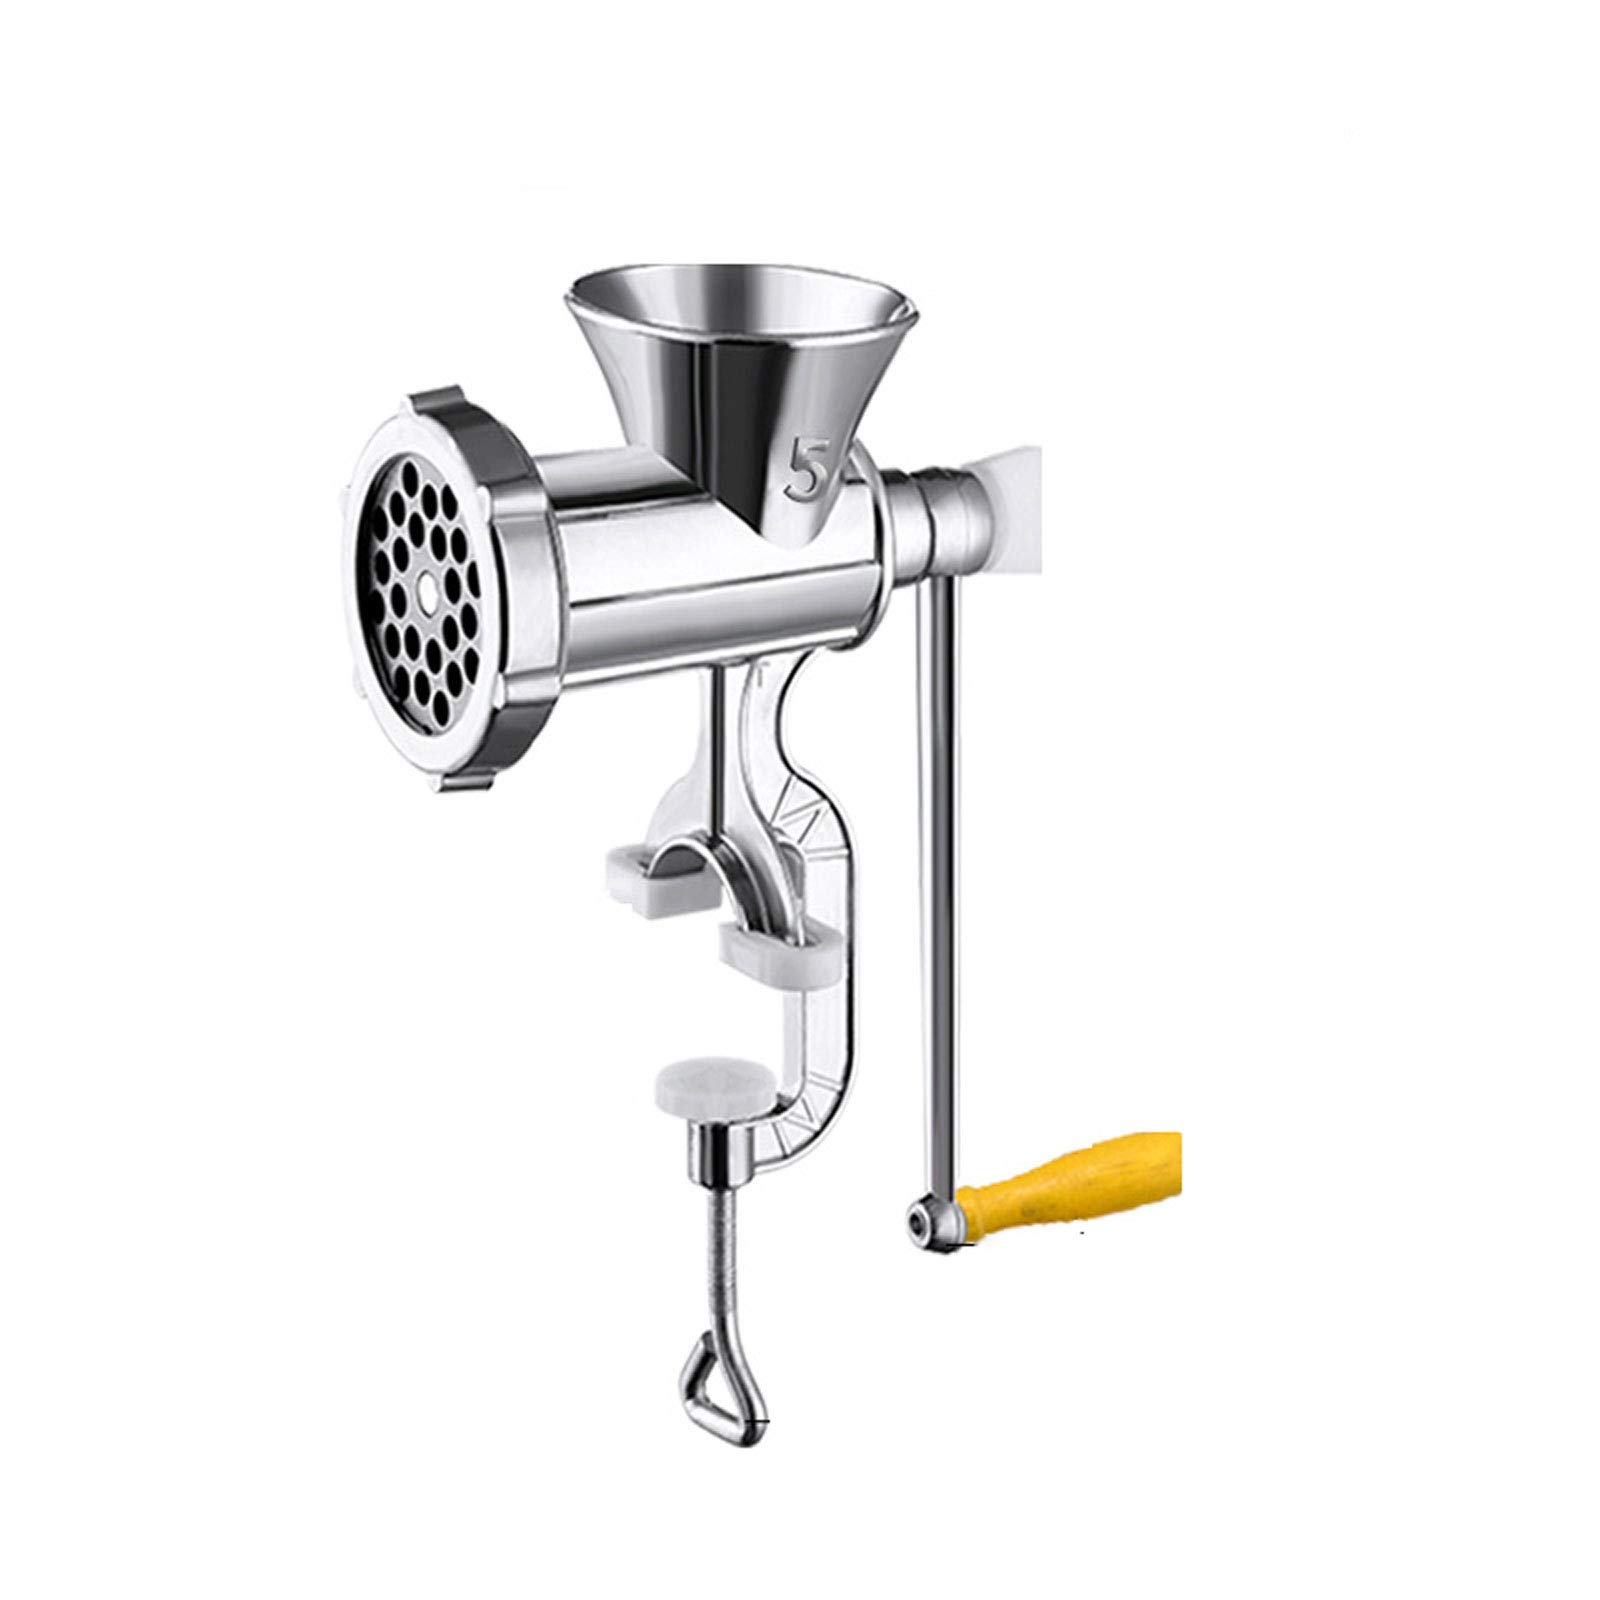 OUTHOME Meat Grinder, A Manual Meat Grinder That Integrates Meat Grinder, Sausage, Nut and Other Functions, Aluminum Alloy Material, 2 Models,S